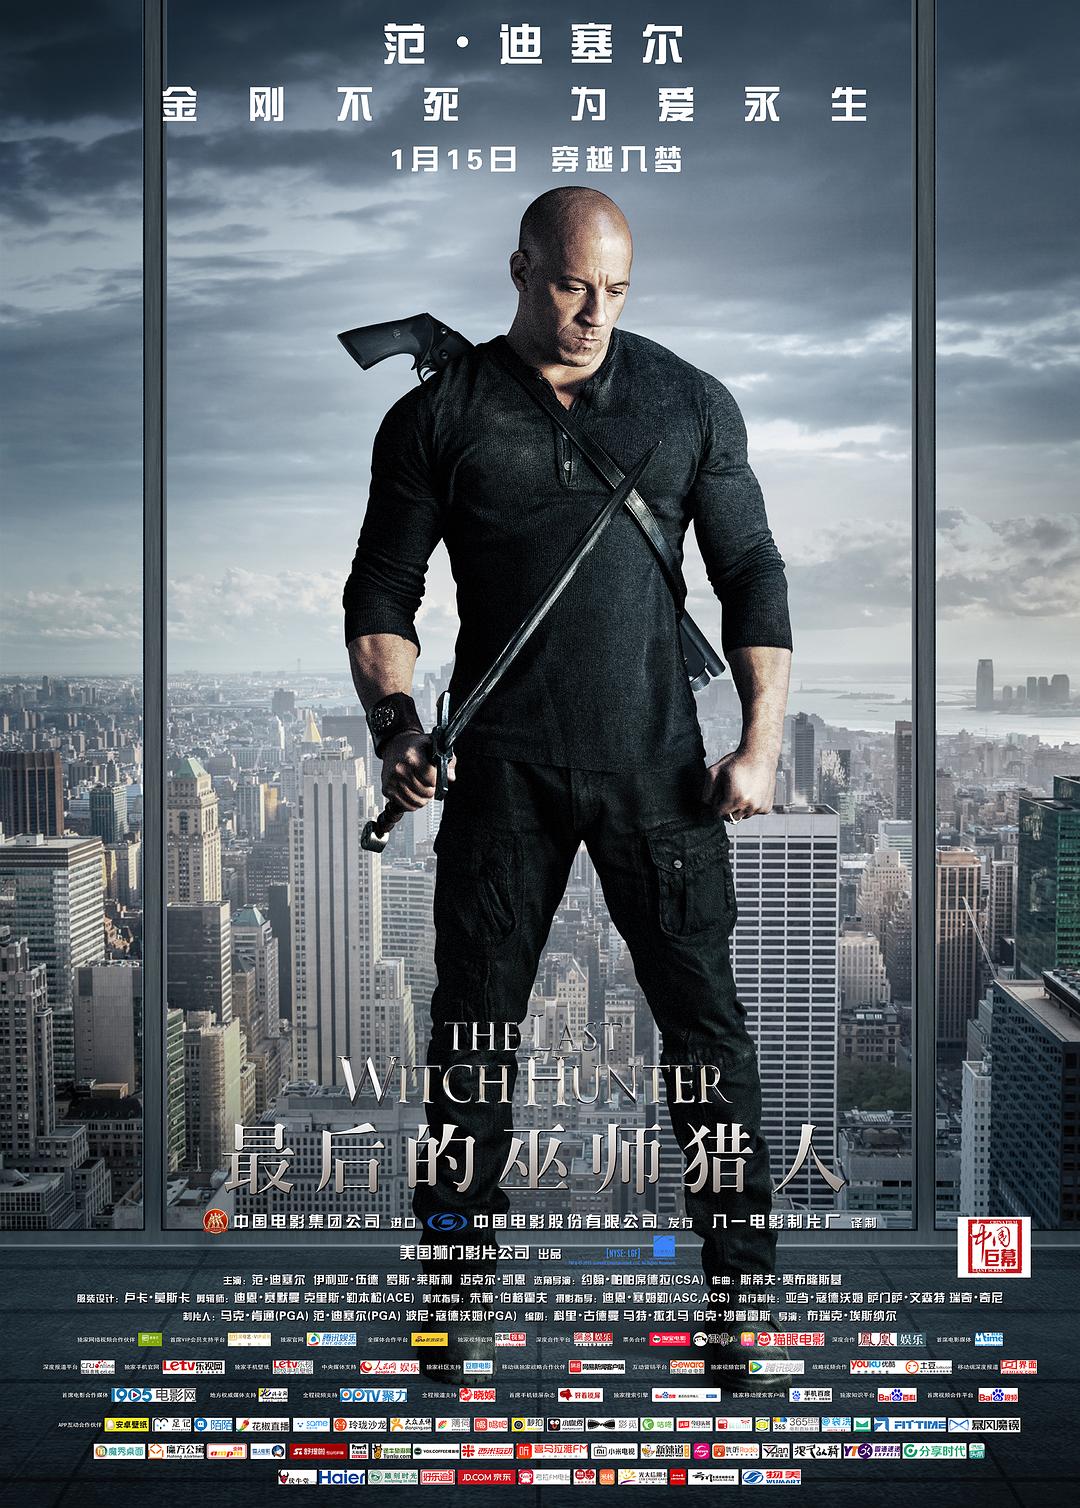 ʦ The.Last.Witch.Hunter.2015.1080p.BluRay.x264-DRONES 7.66GB-1.png